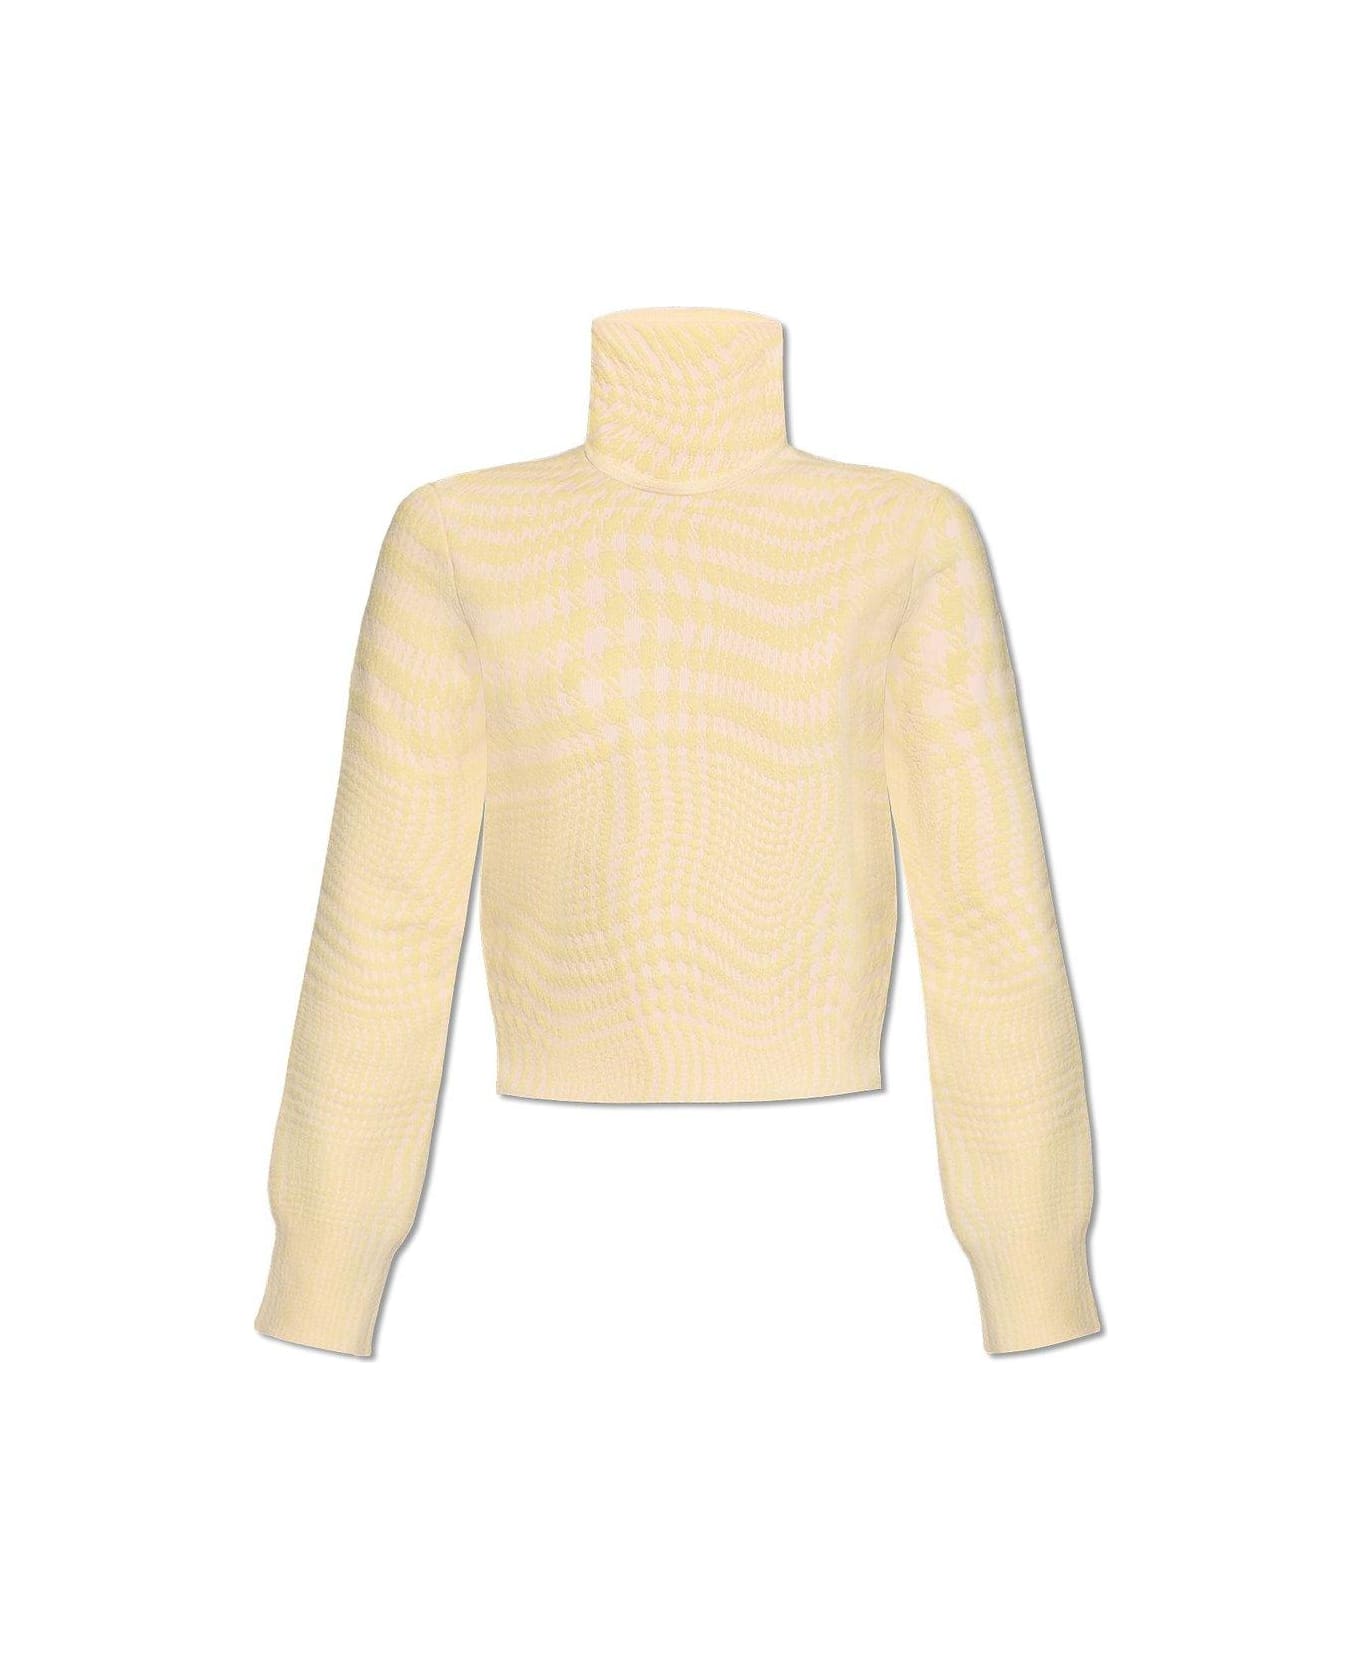 Burberry Warped Houndstooth Jacquard High-neck Jumper - Cameo ip pattern